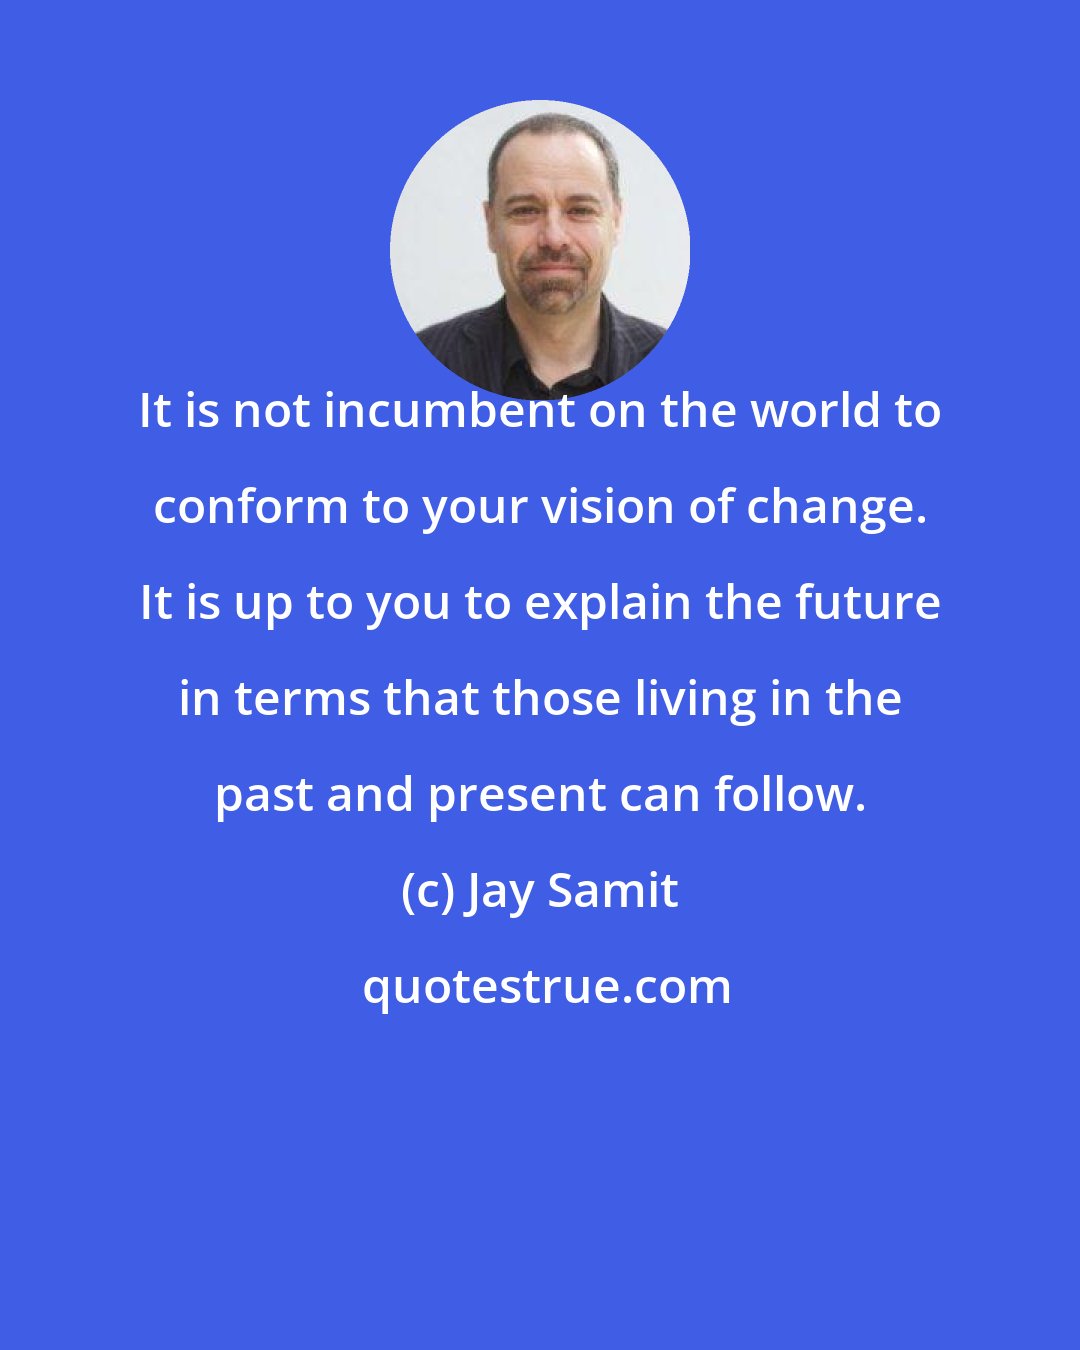 Jay Samit: It is not incumbent on the world to conform to your vision of change. It is up to you to explain the future in terms that those living in the past and present can follow.